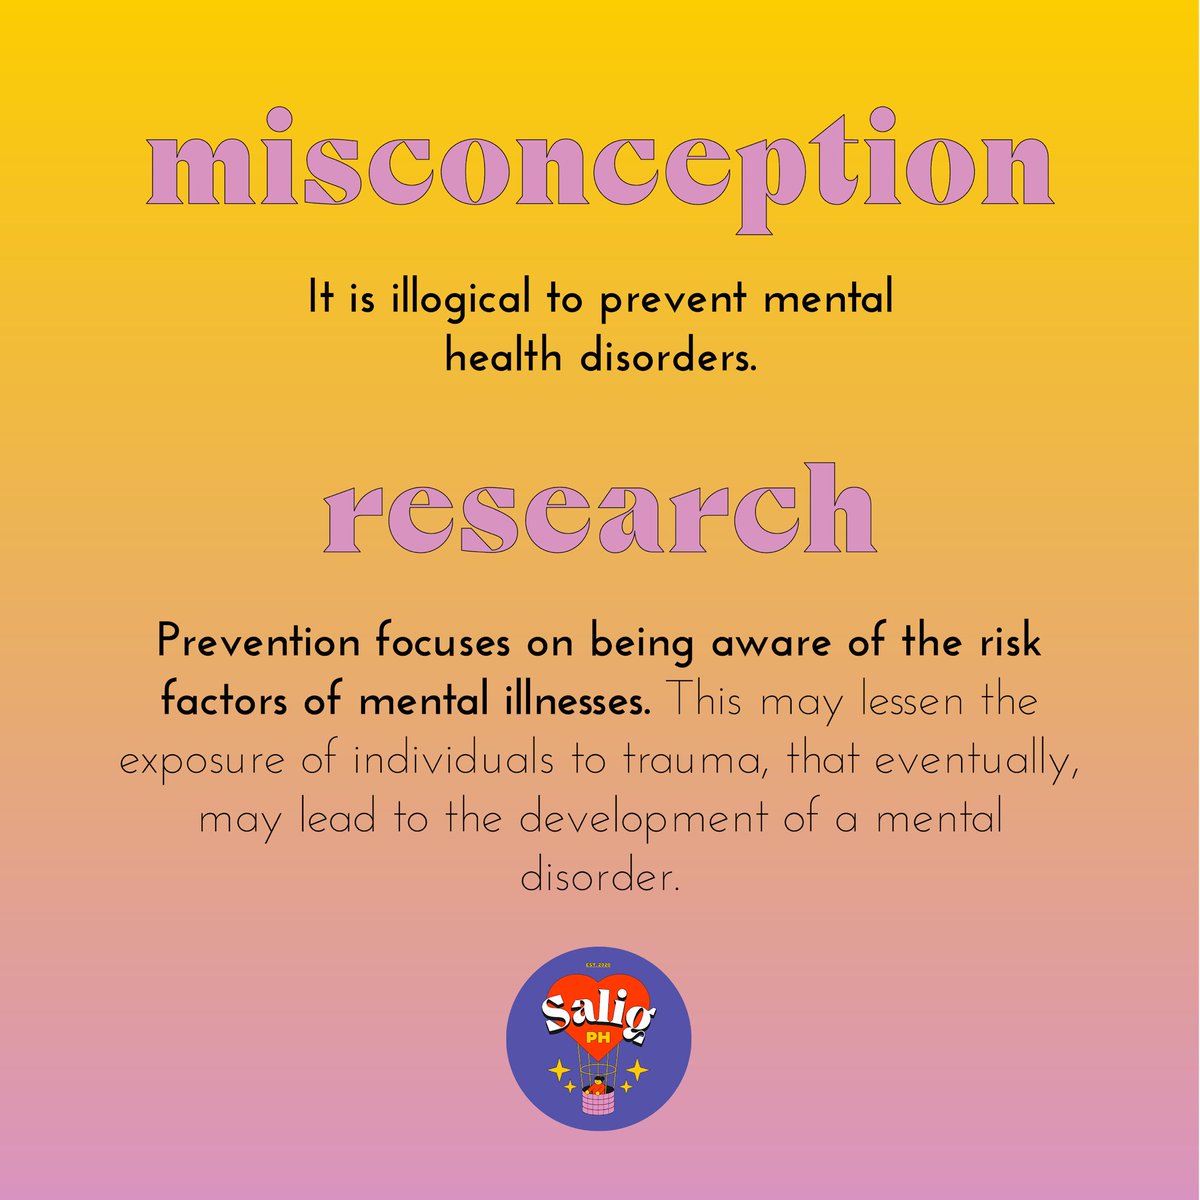 Mental health misconceptions create a barrier to someone who wants to reach out. Our mental health signifies the importance of recognizing that we all have a part in raising awareness about mental health. (1/3) #SaligPH #SaligStands #BreakTheStigma 